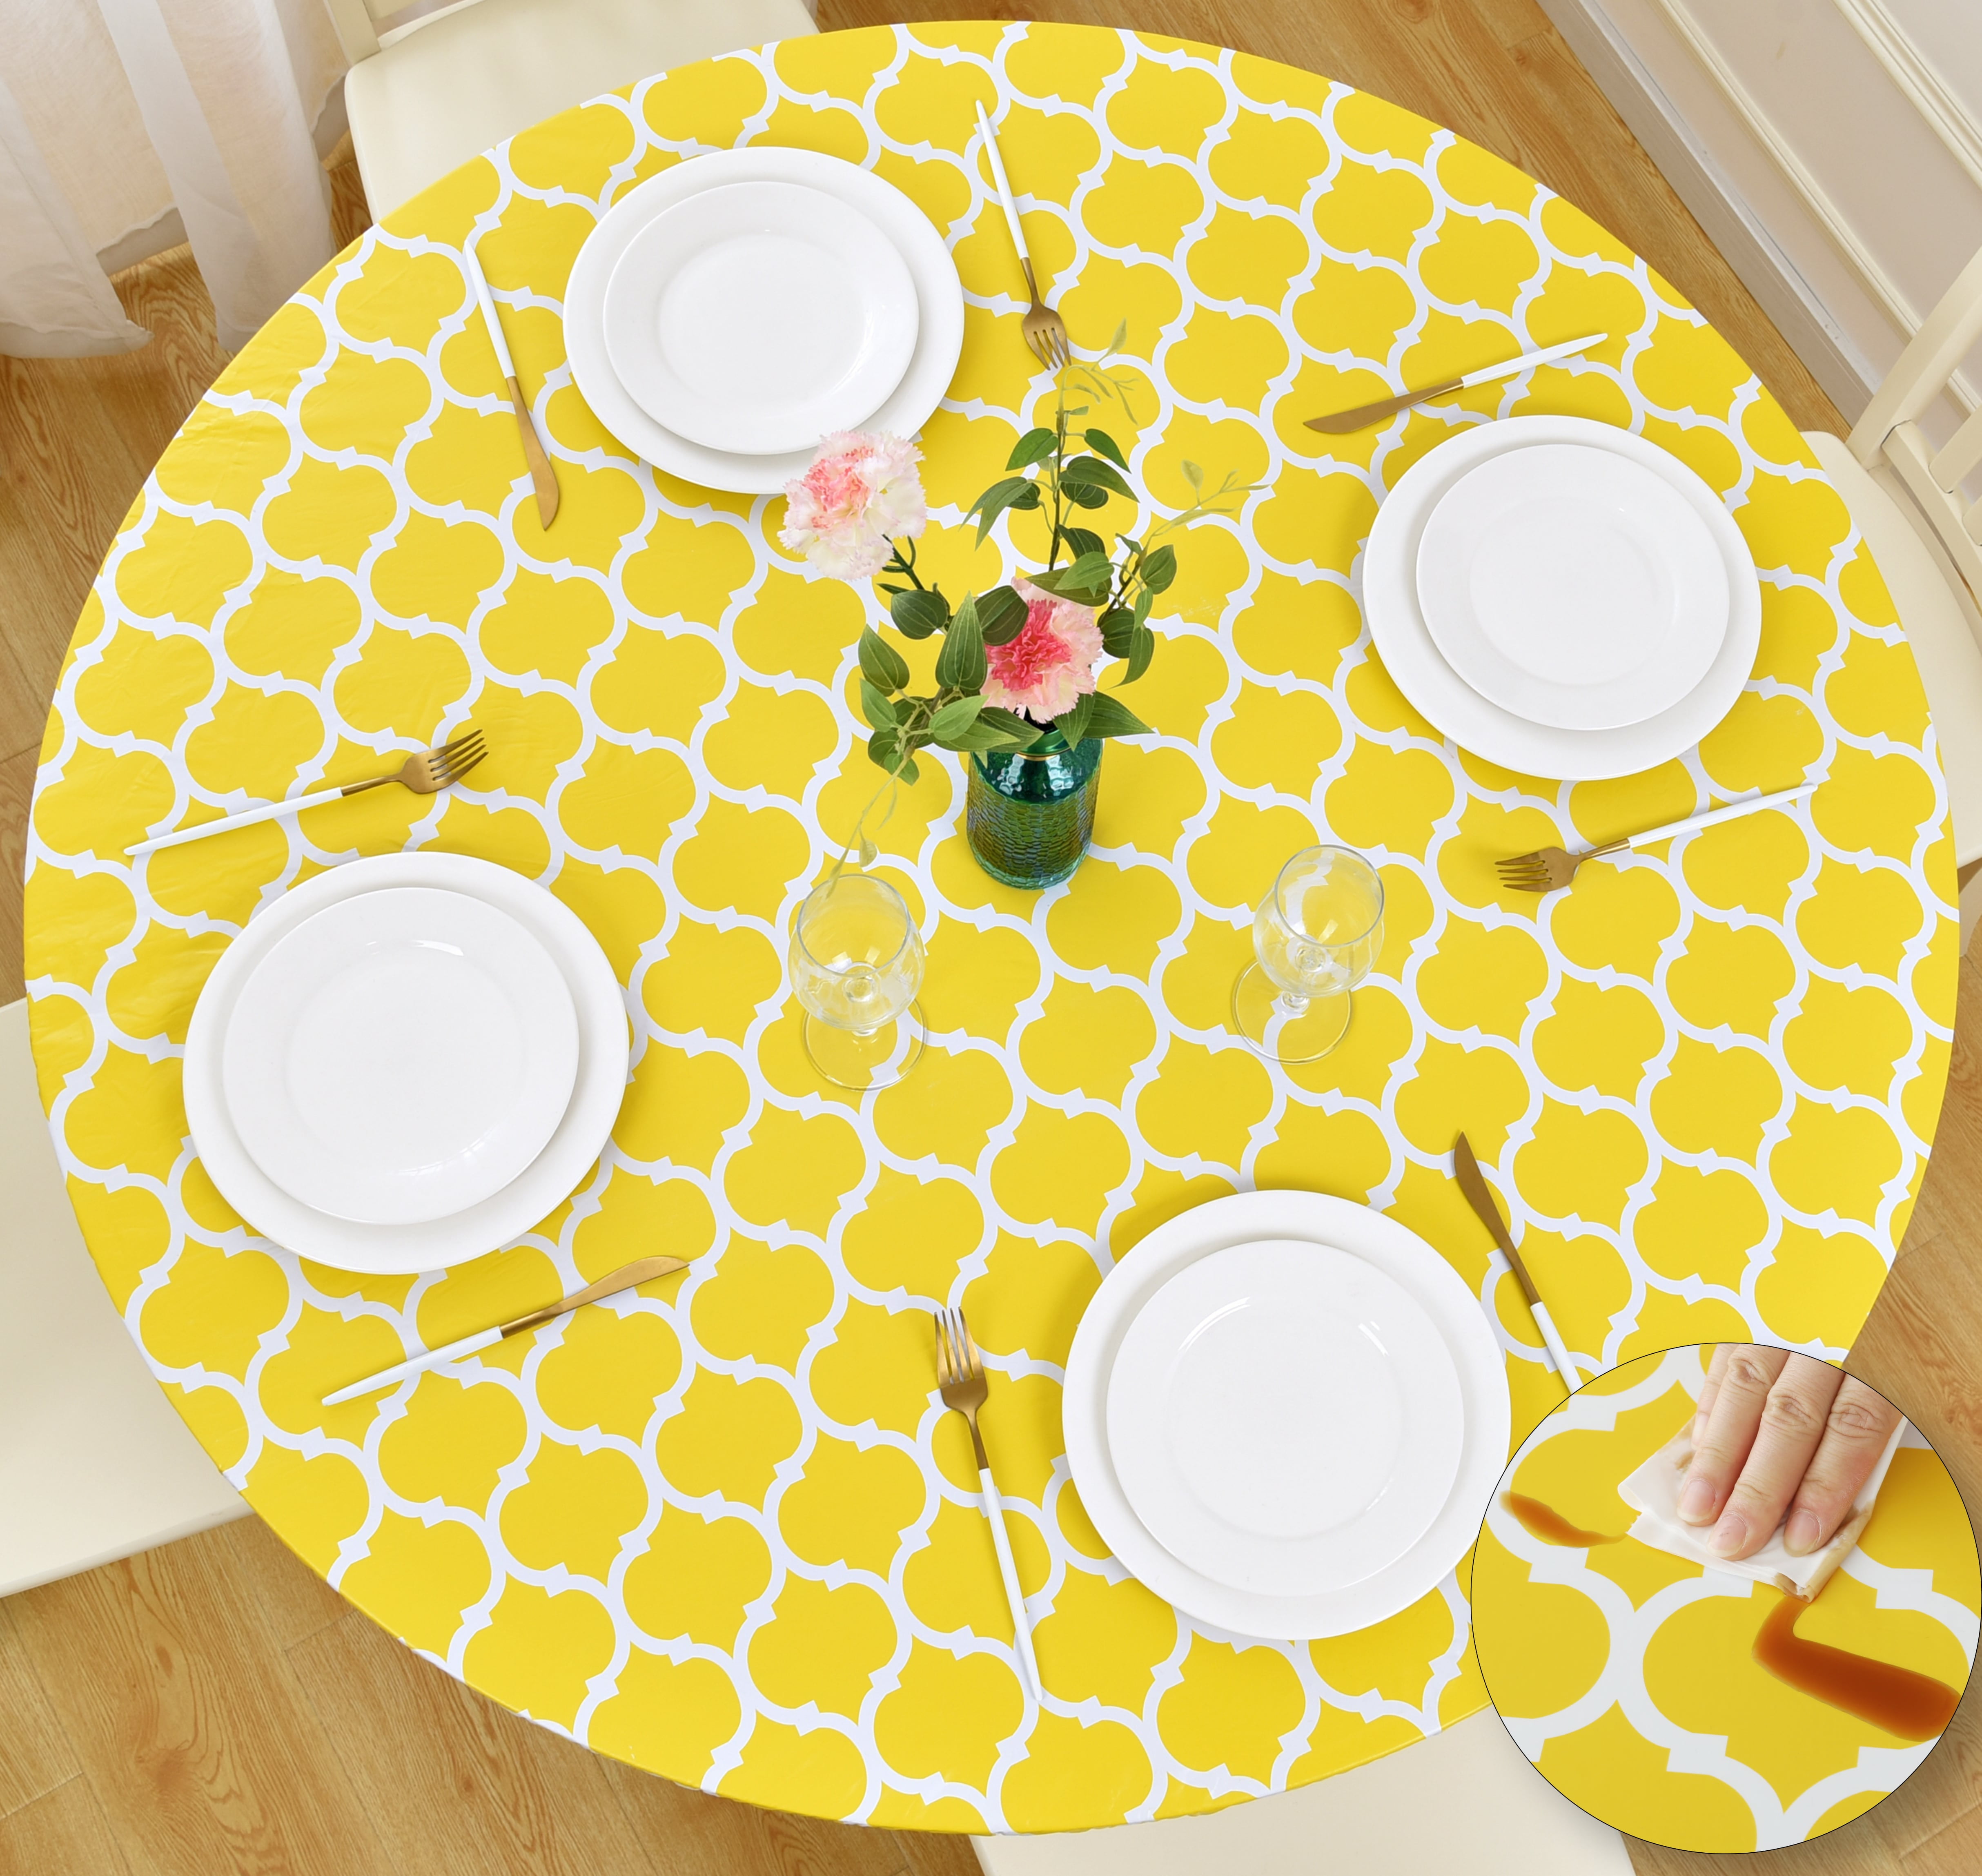 Rally Home Goods Indoor Outdoor Patio Round Fitted Vinyl Tablecloth,  Flannel Backing, Elastic Edge, Waterproof Wipeable Cover, Yellow Moroccan  Trellis Pattern for 5-Seat Table of 36-42'' Diameter - Walmart.com